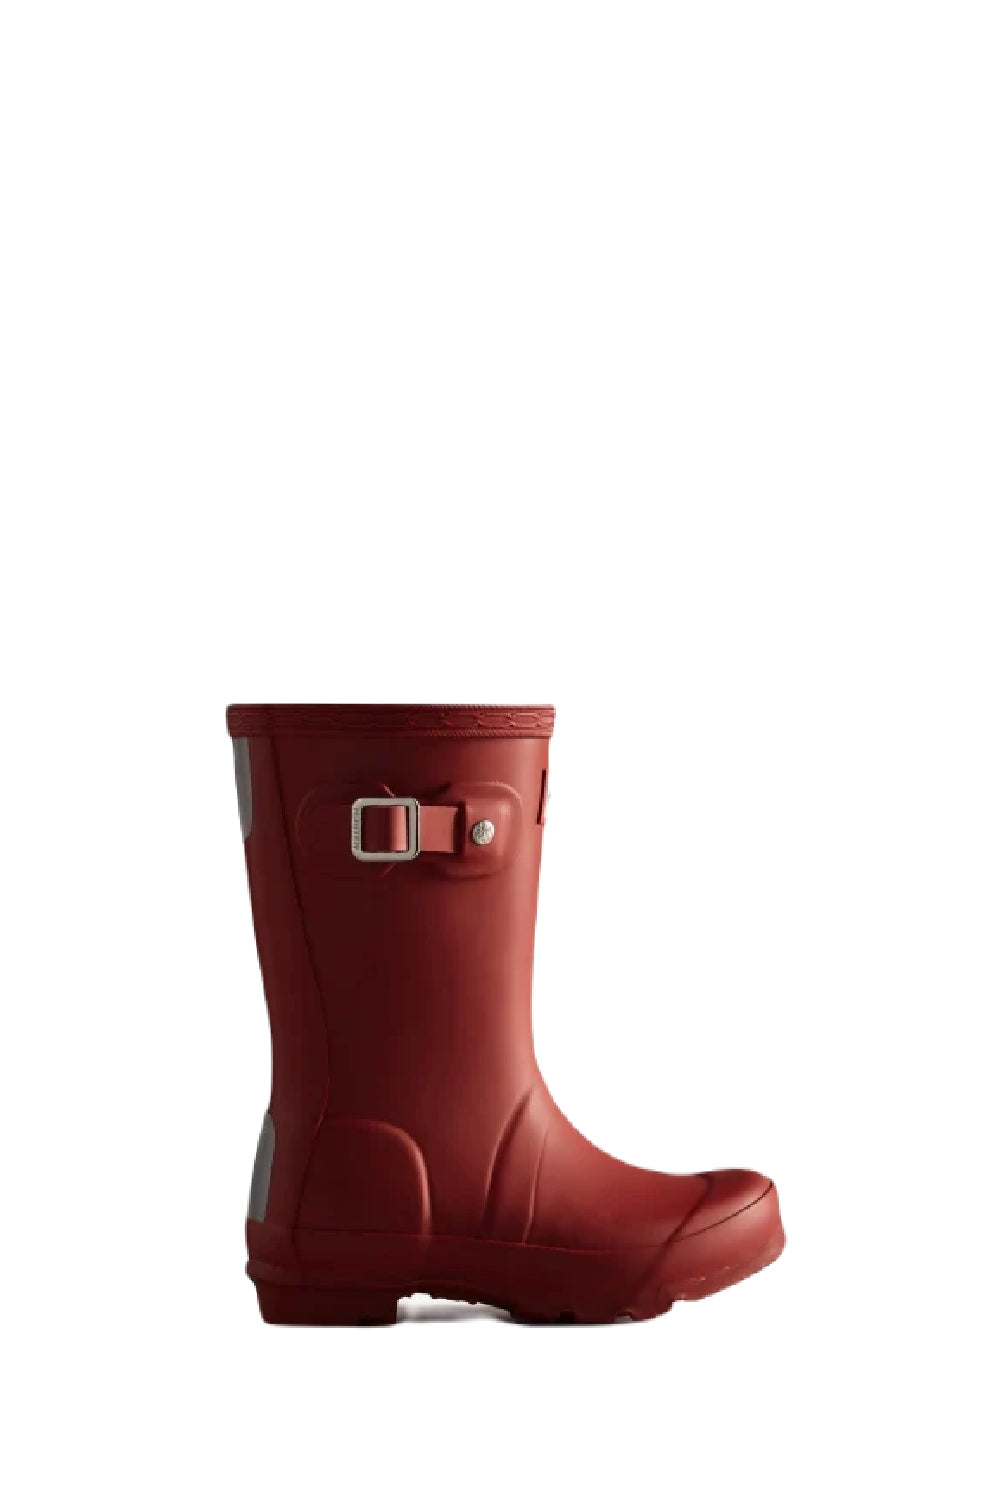 Hunter Little Kids Original Wellington Boots in Military Red 